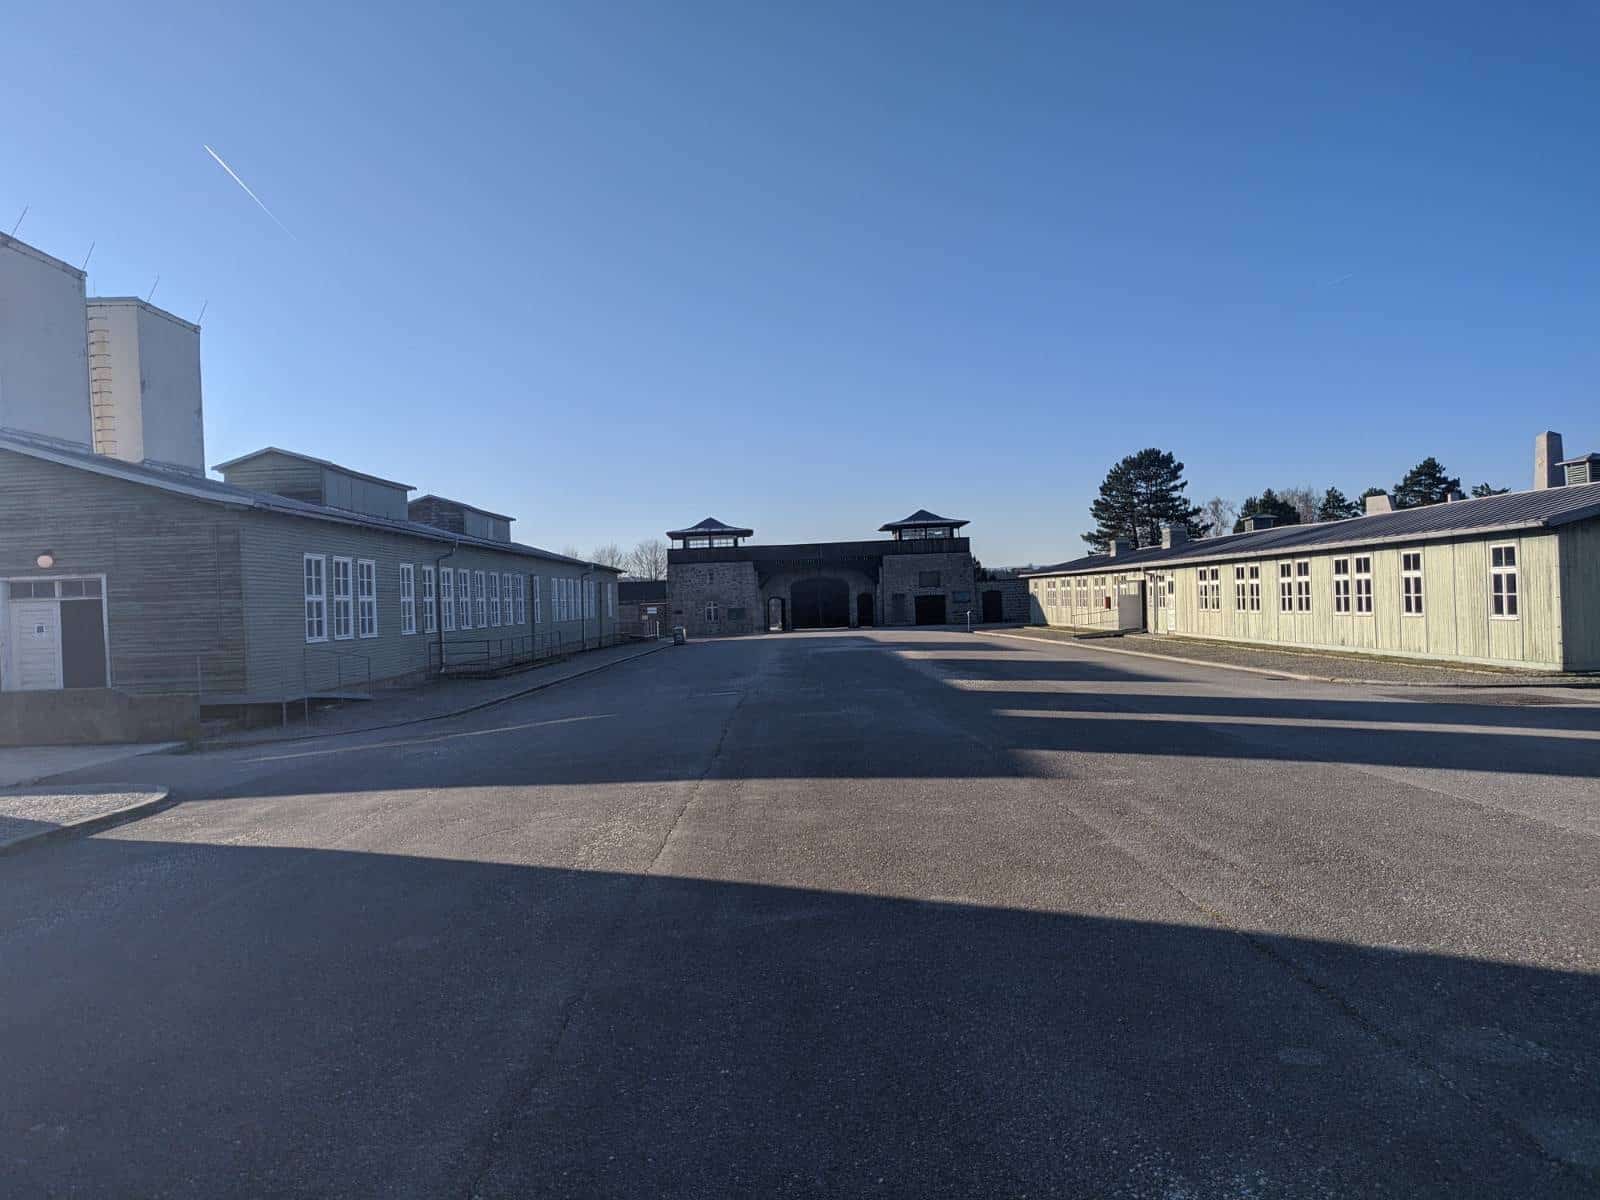 The concentration camp at Mauthausen